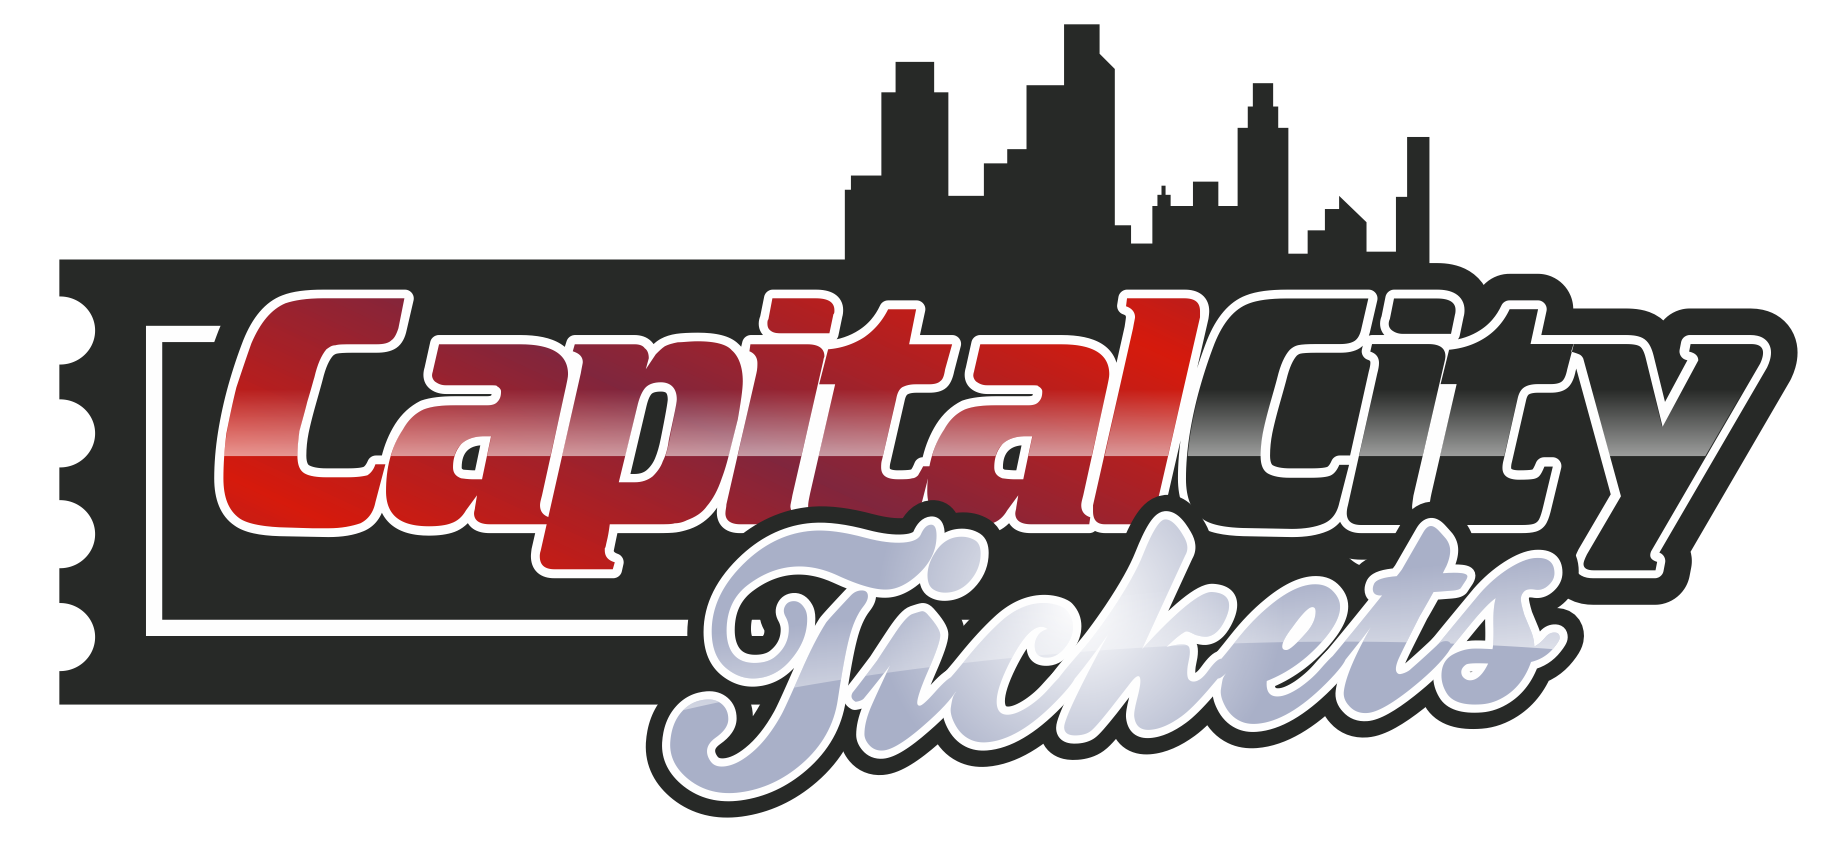 Cheap 2021-22 Florida Panthers Hockey Tickets for Center Ice, Upper, and Club Seating Online with Promo Code at Capital City Tickets - See Schedules, Seating Charts, and Game Dates